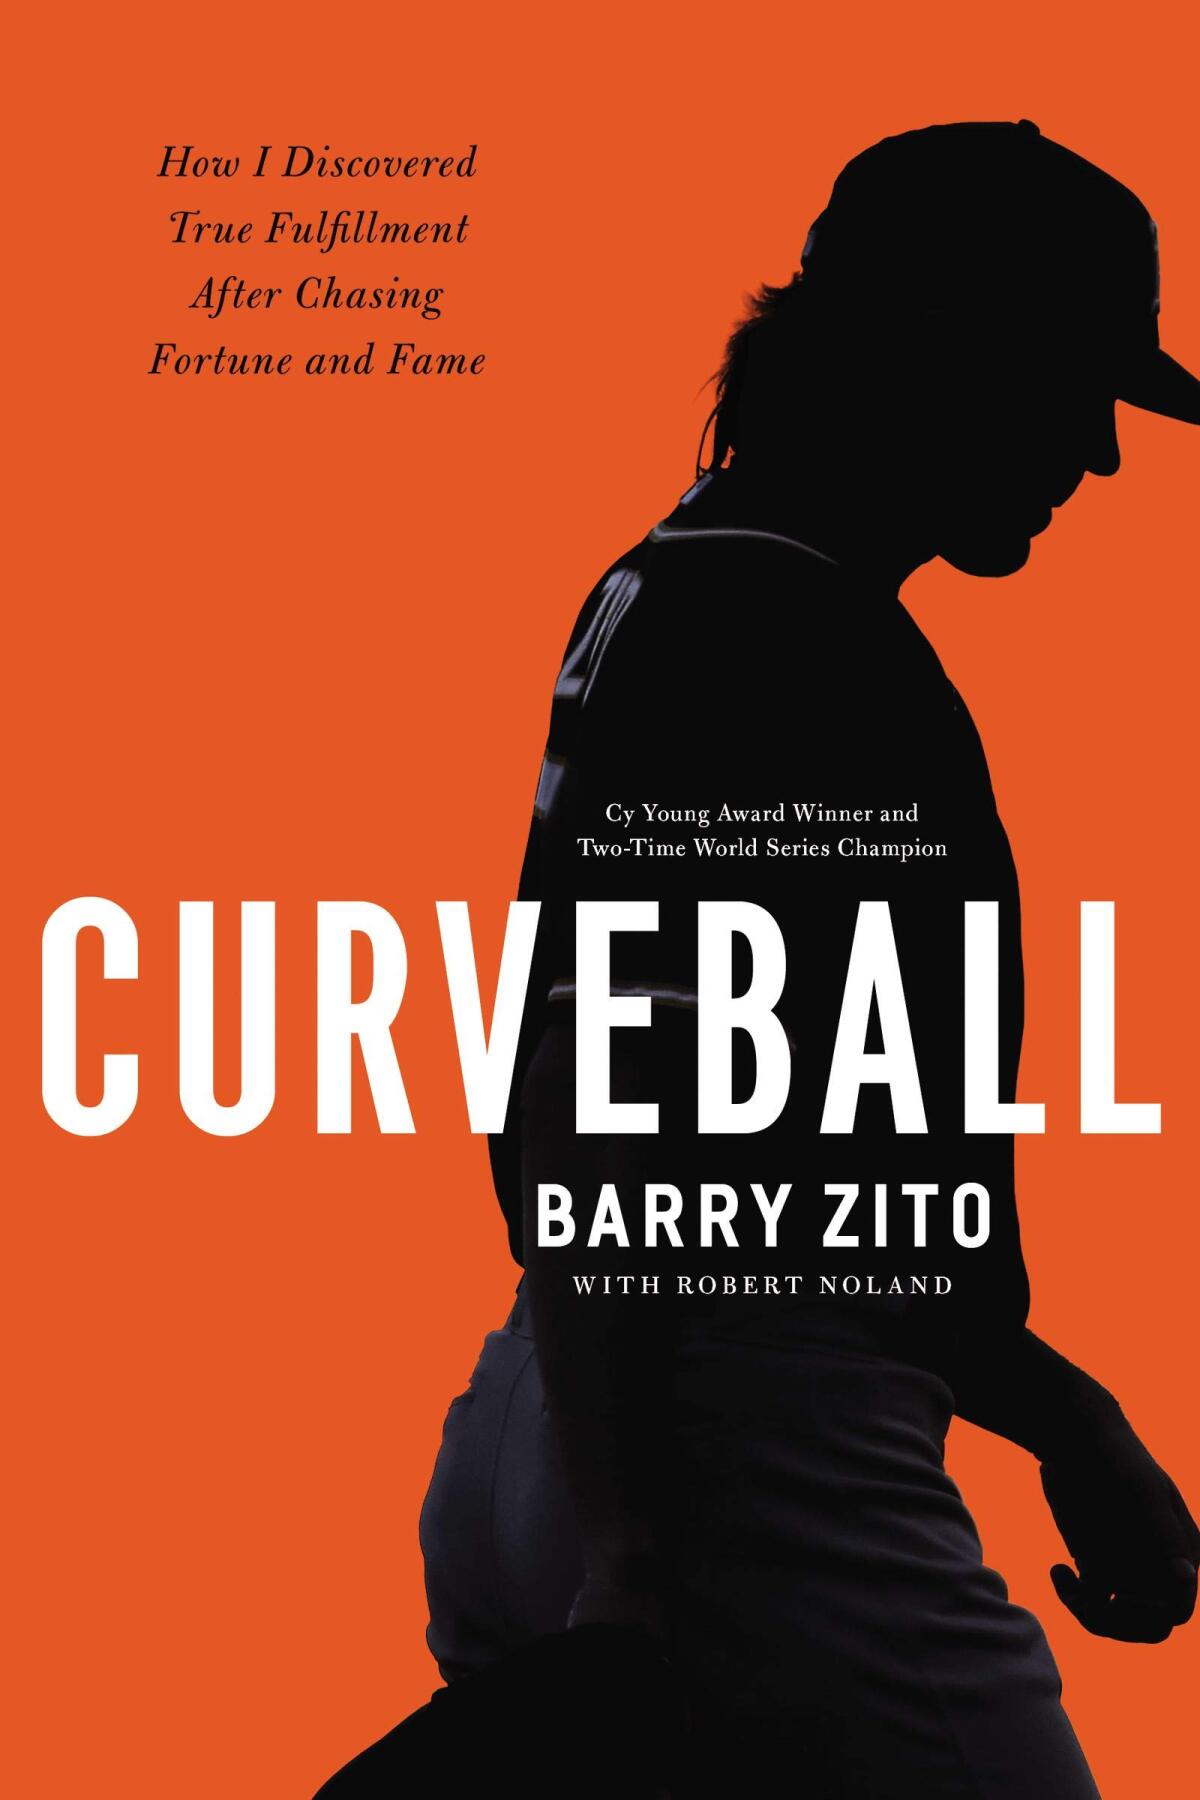 Cover art for “Curveball: How I Discovered True Fulfillment After Chasing Fortune and Fame.”